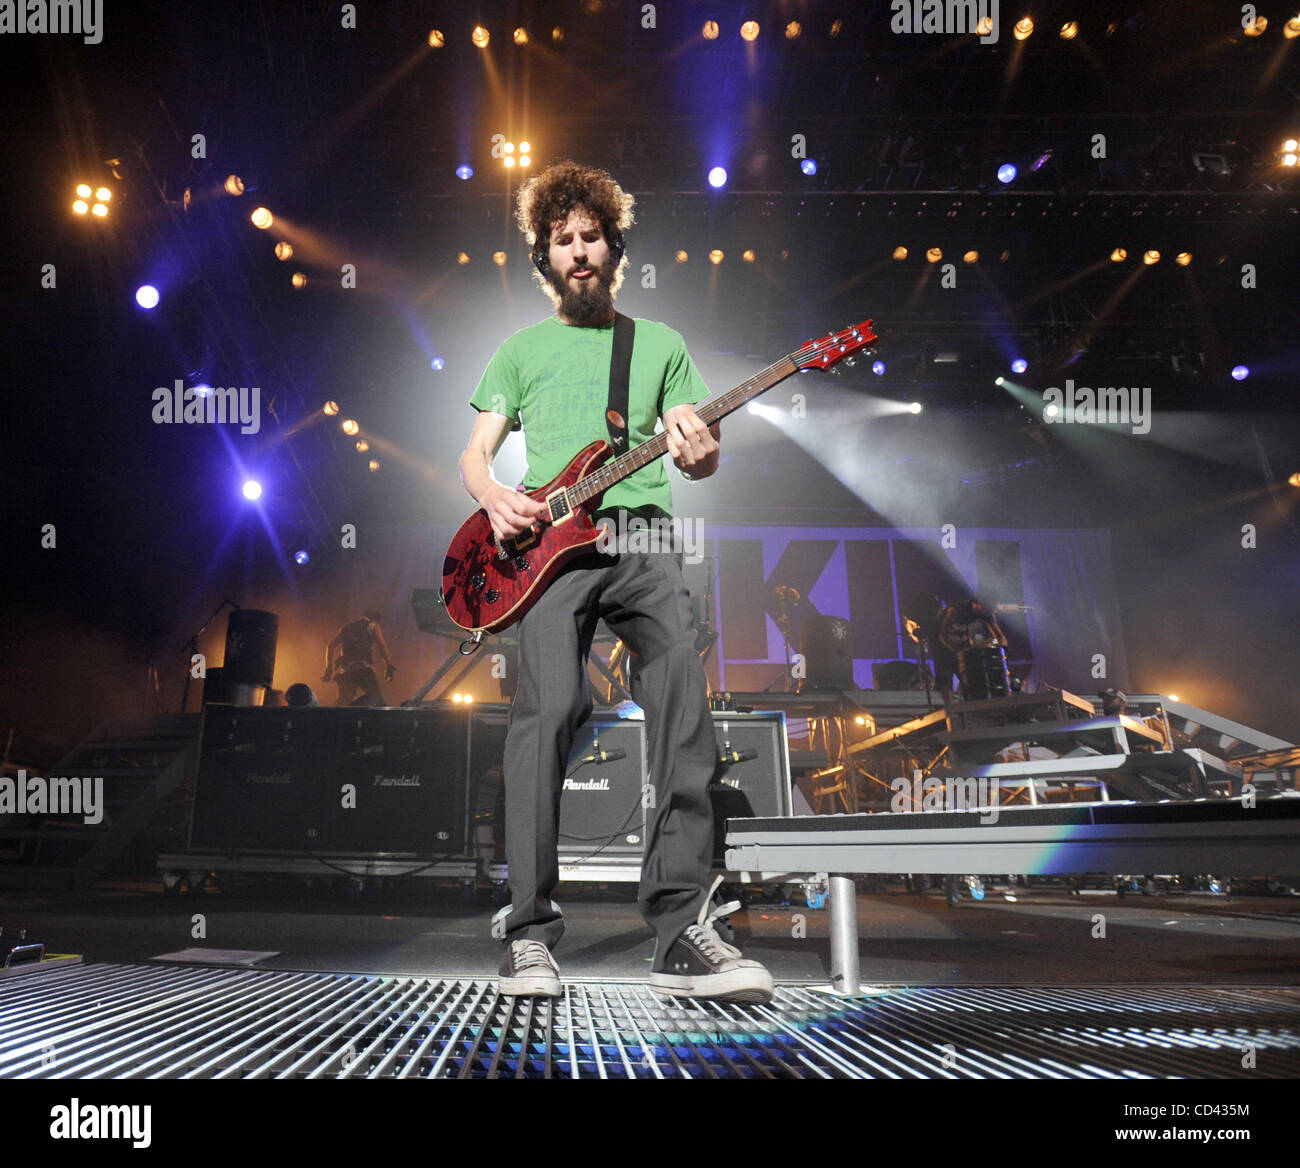 July 25, 2008 - Raleigh, North Carolina; USA - Lead Guitarist BRAD DELSON  of the band Linkin Park performs live as the 2008 Projekt Revolution Tour  makes a stop at the Time